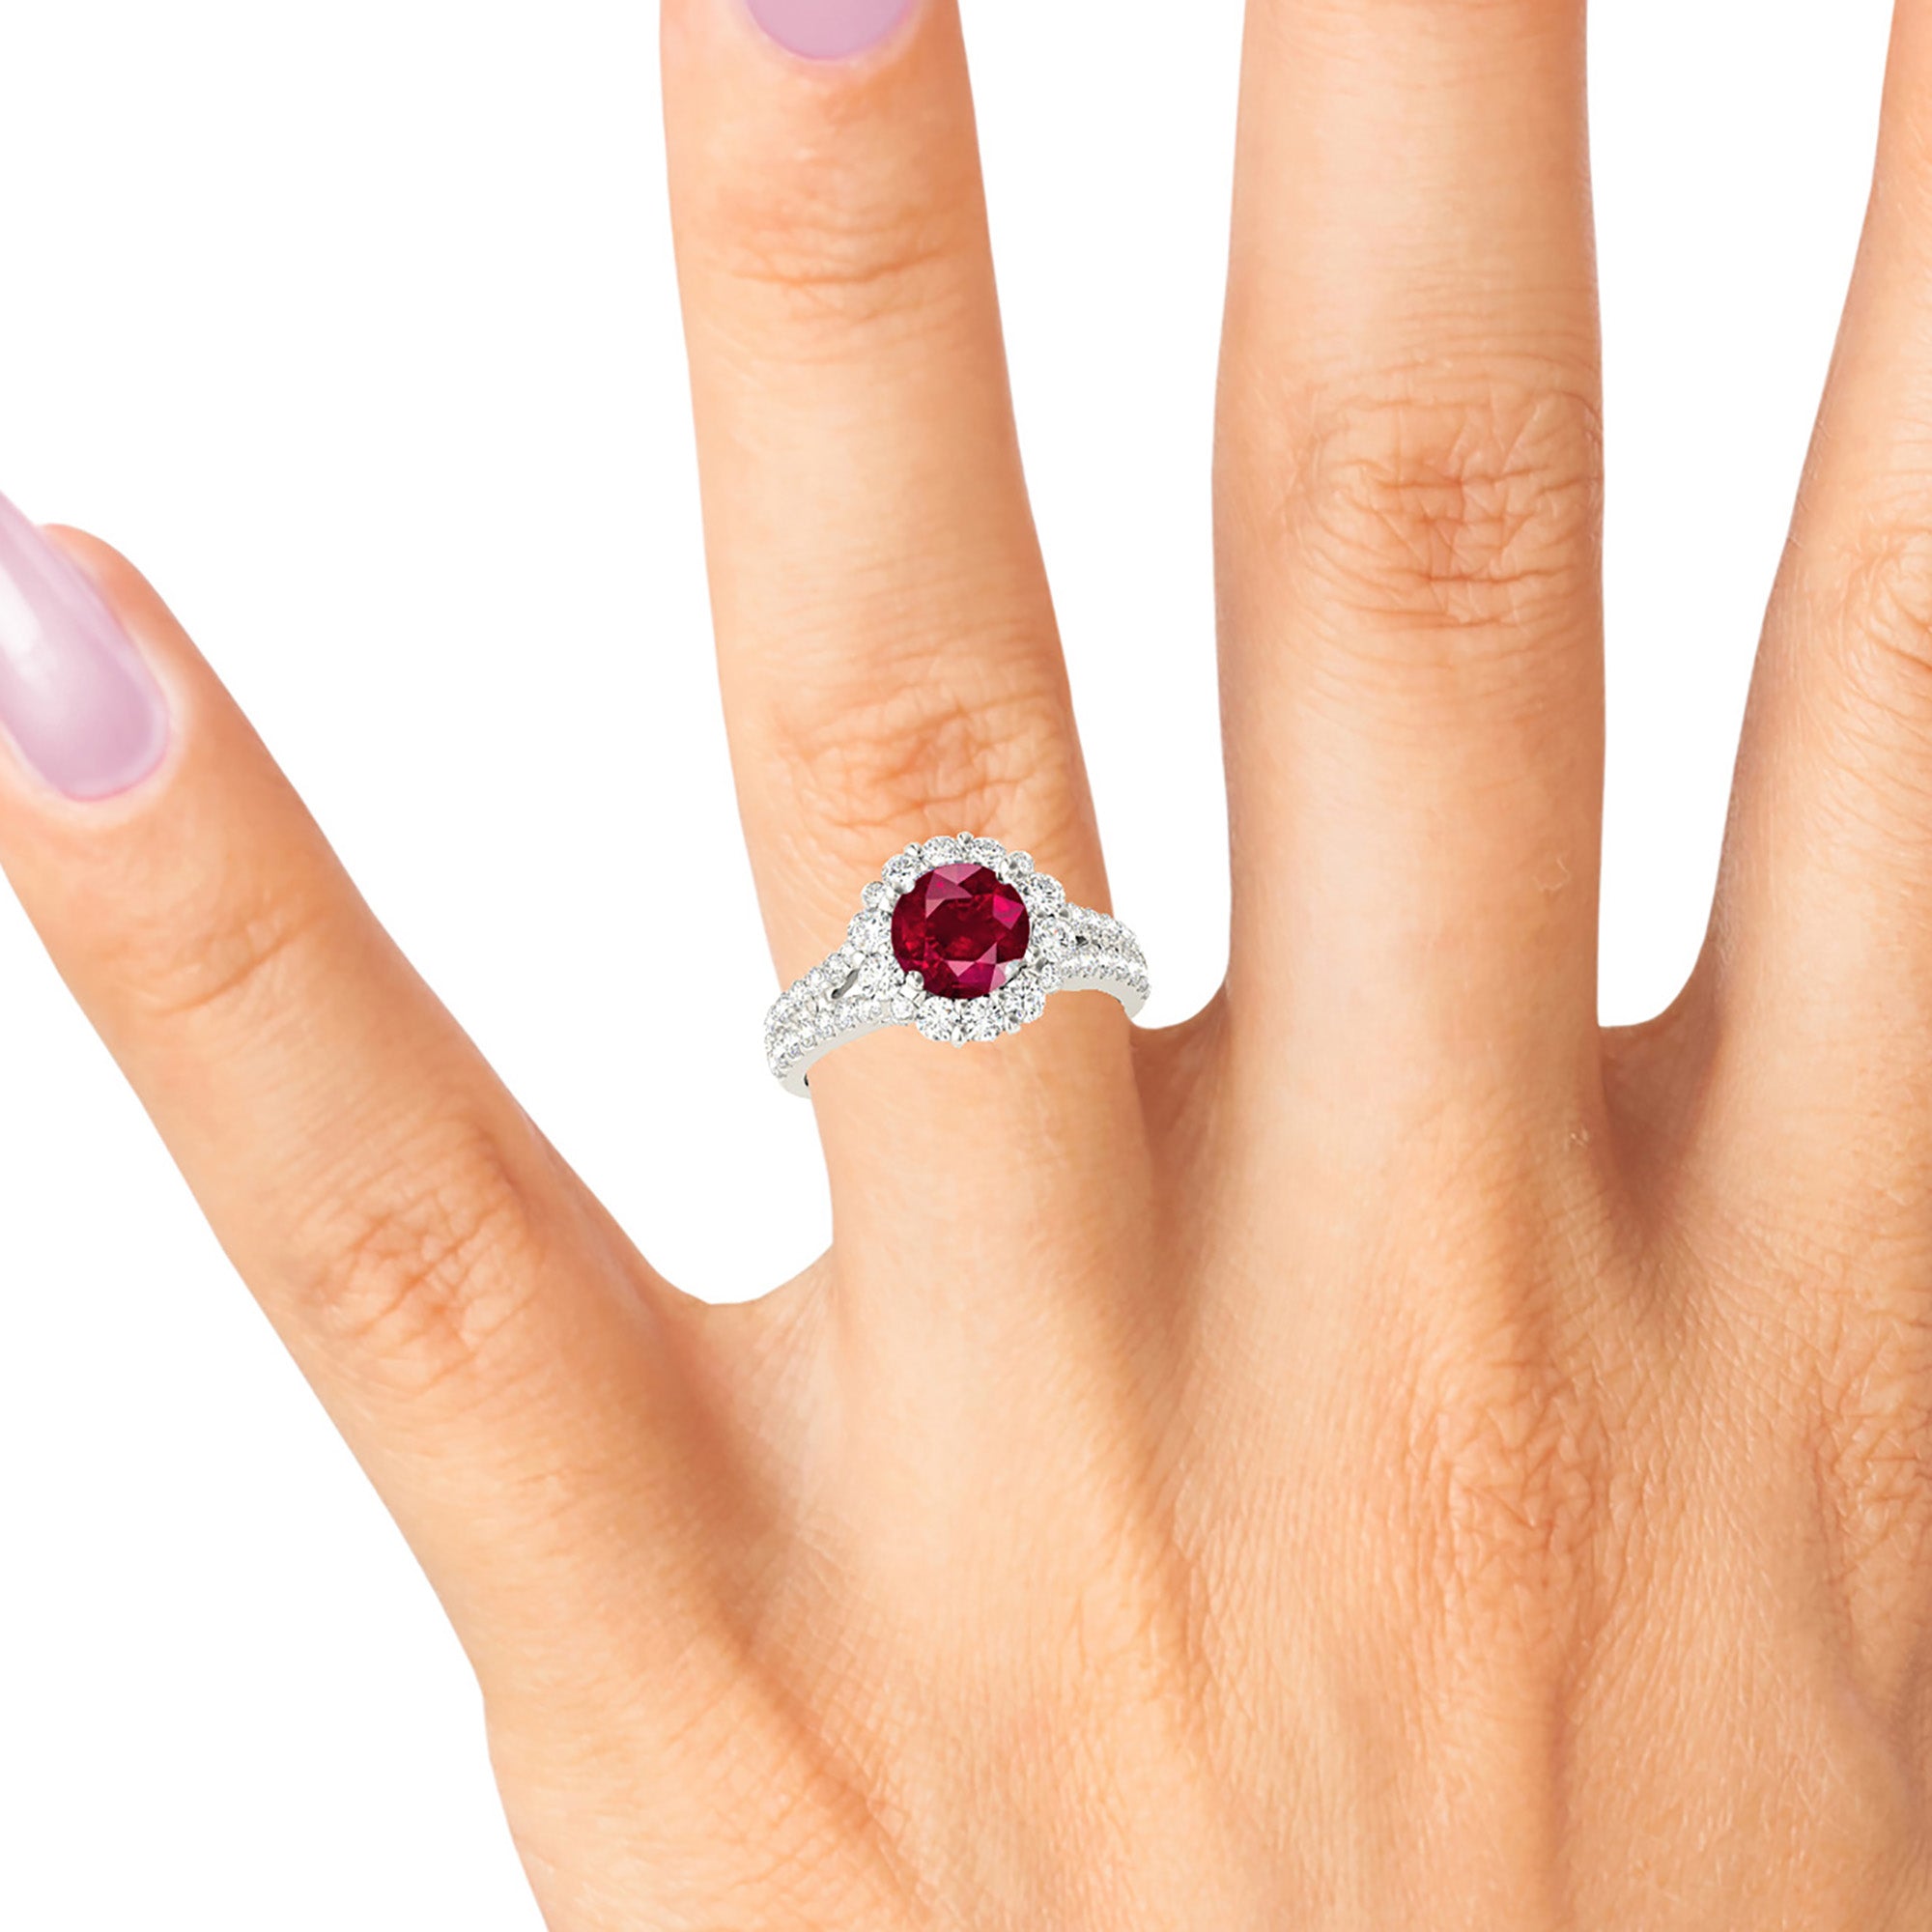 1.79 ct. Genuine Ruby Ring With 0.90 ctw. Diamond Floral Halo And Small V Split Shank-in 14K/18K White, Yellow, Rose Gold and Platinum - Christmas Jewelry Gift -VIRABYANI